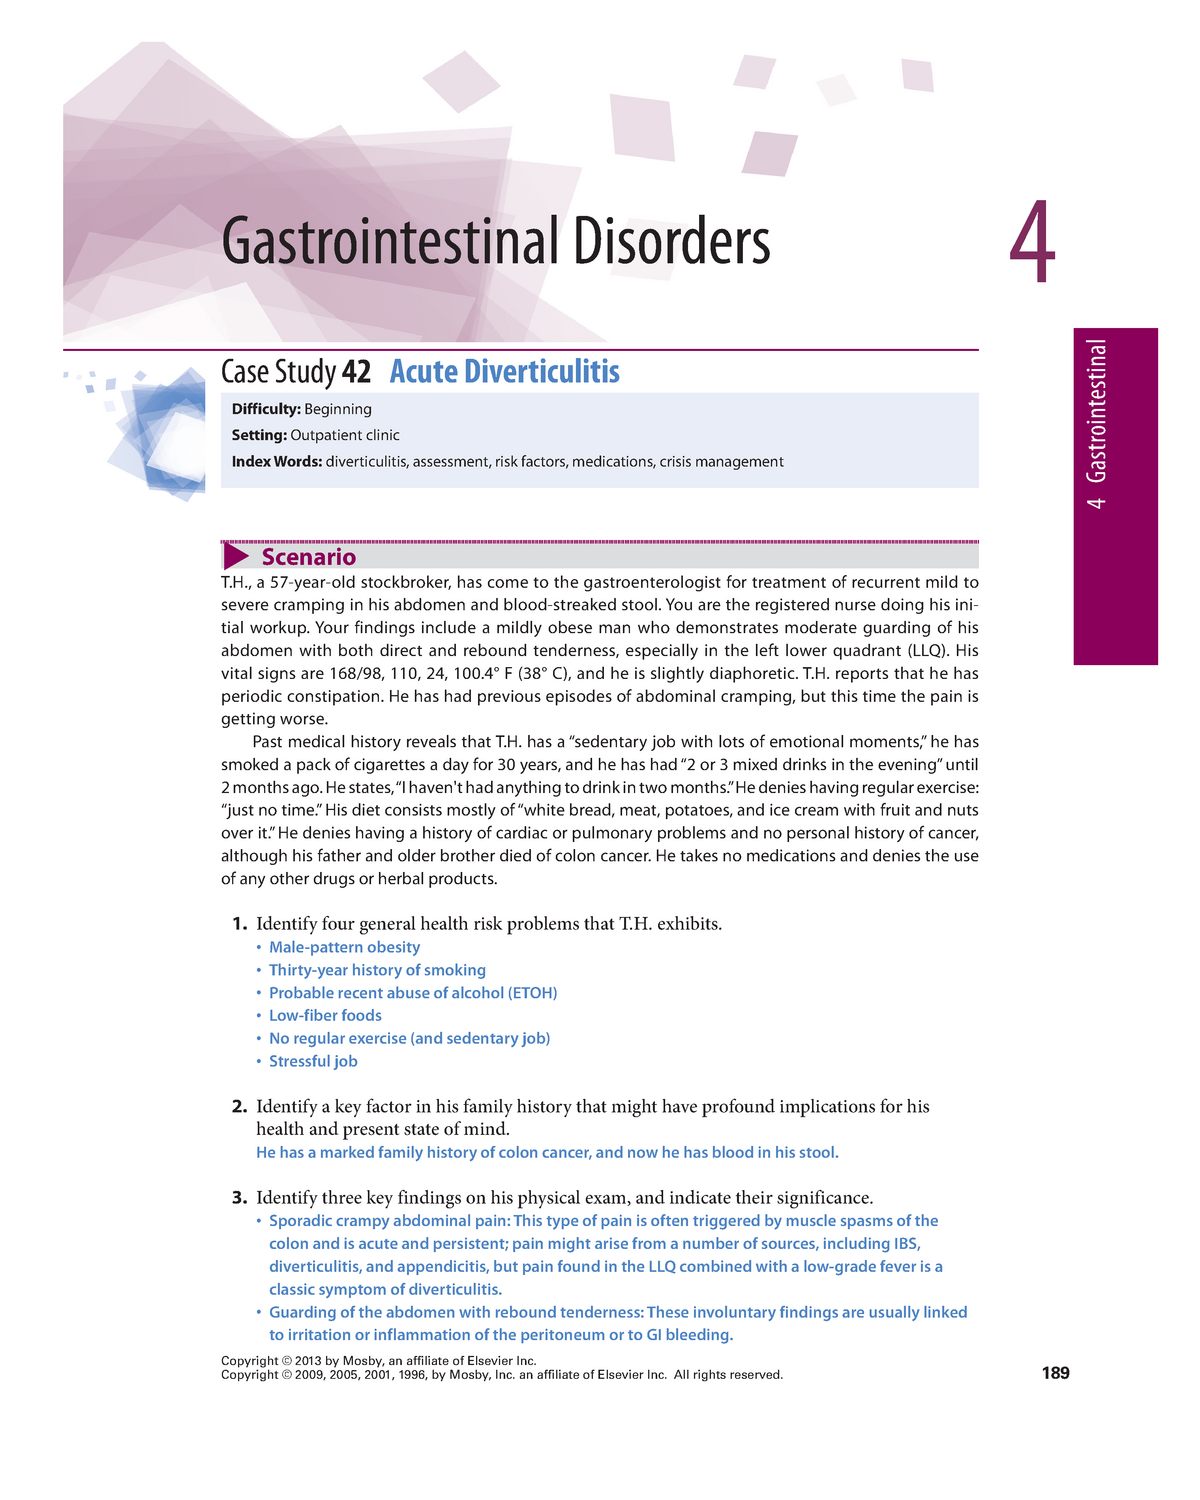 case study 43 gastrointestinal disorders